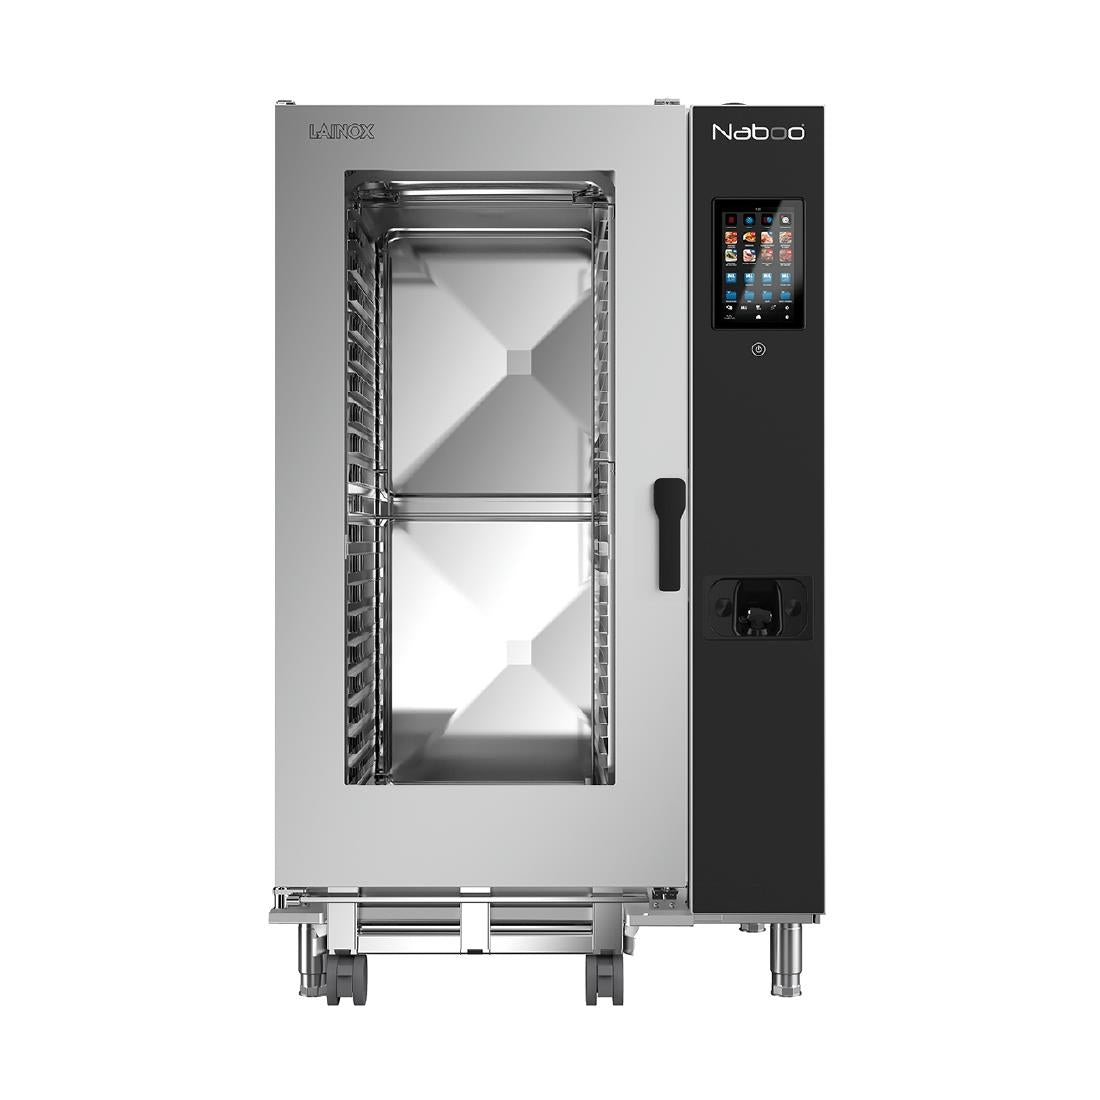 HP546 Lainox Naboo Boosted Electric Touch Screen Combi Oven NAE202BS 20X2/1GN JD Catering Equipment Solutions Ltd